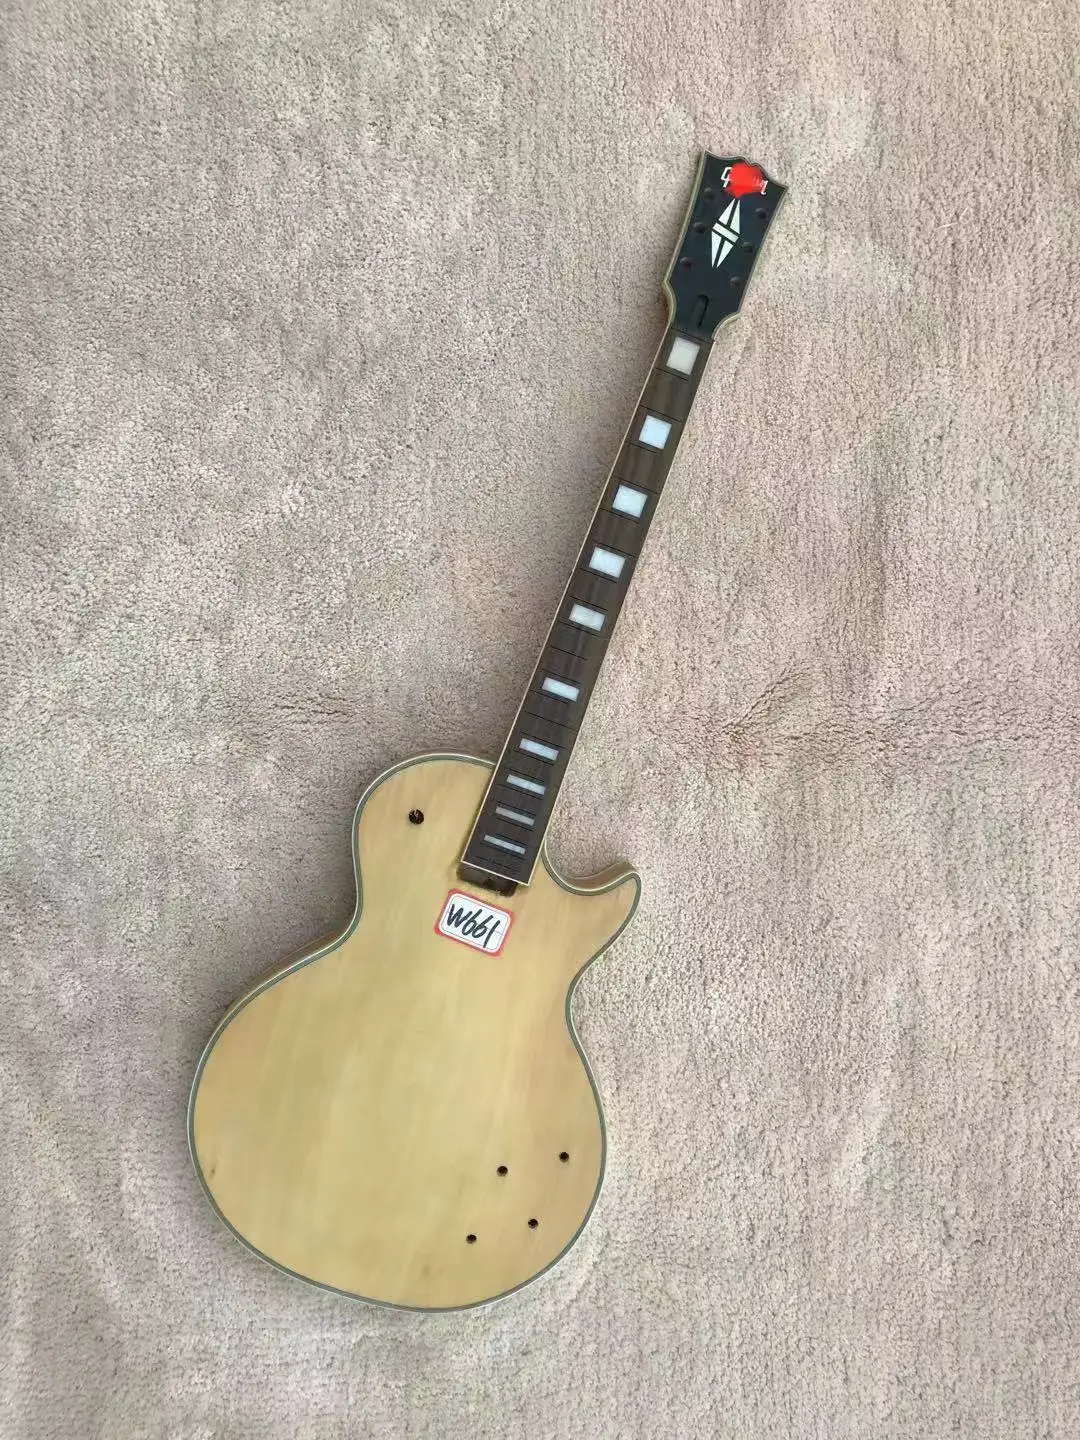 DIY (Not New) G Custom Electric Guitar without Hardwares in Stock Discount Free Shipping W661